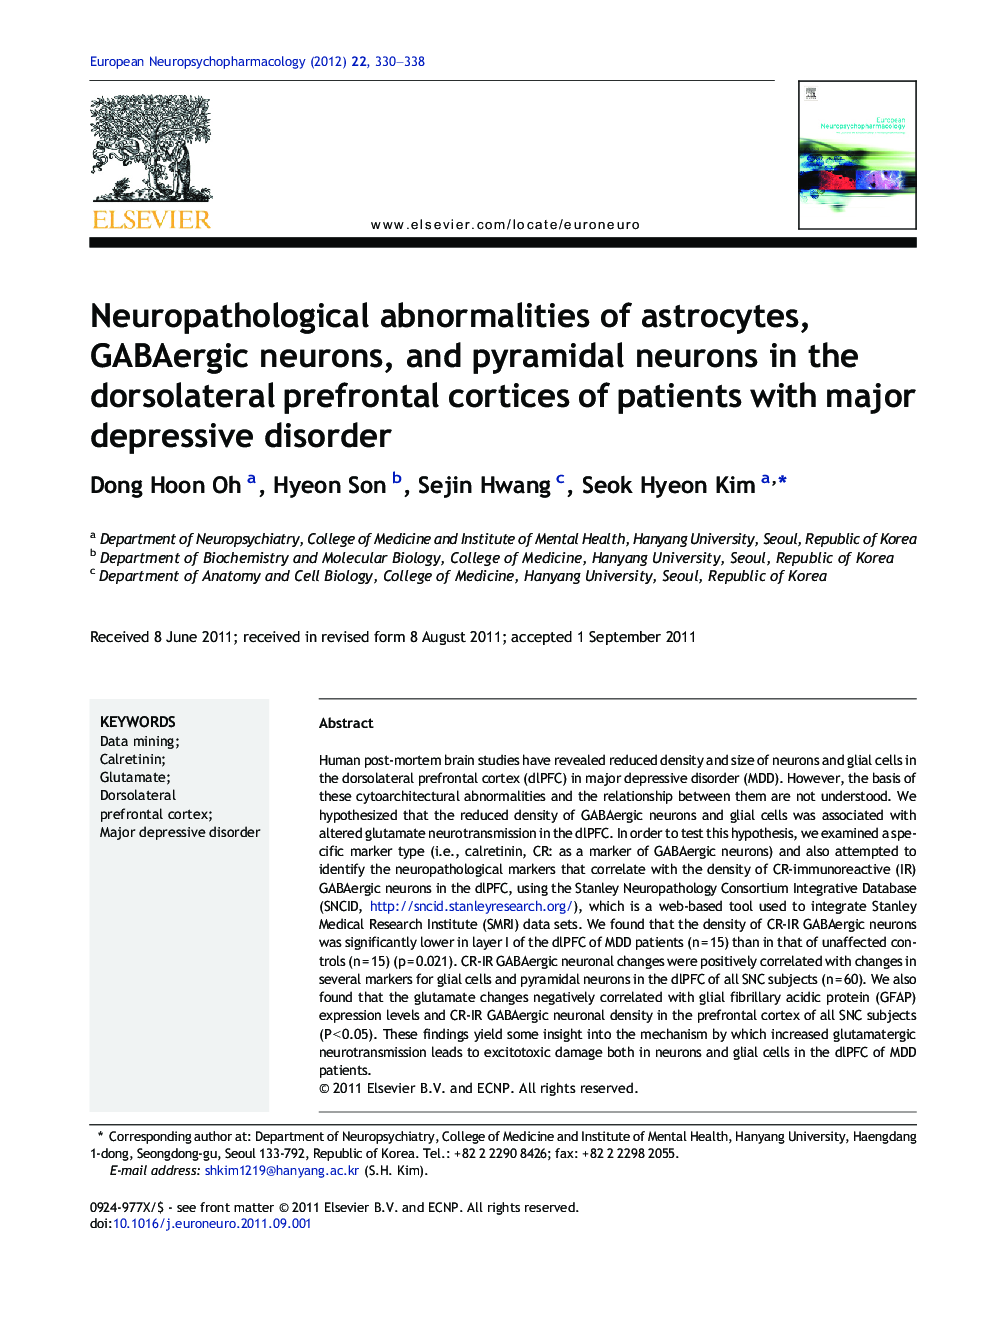 Neuropathological abnormalities of astrocytes, GABAergic neurons, and pyramidal neurons in the dorsolateral prefrontal cortices of patients with major depressive disorder